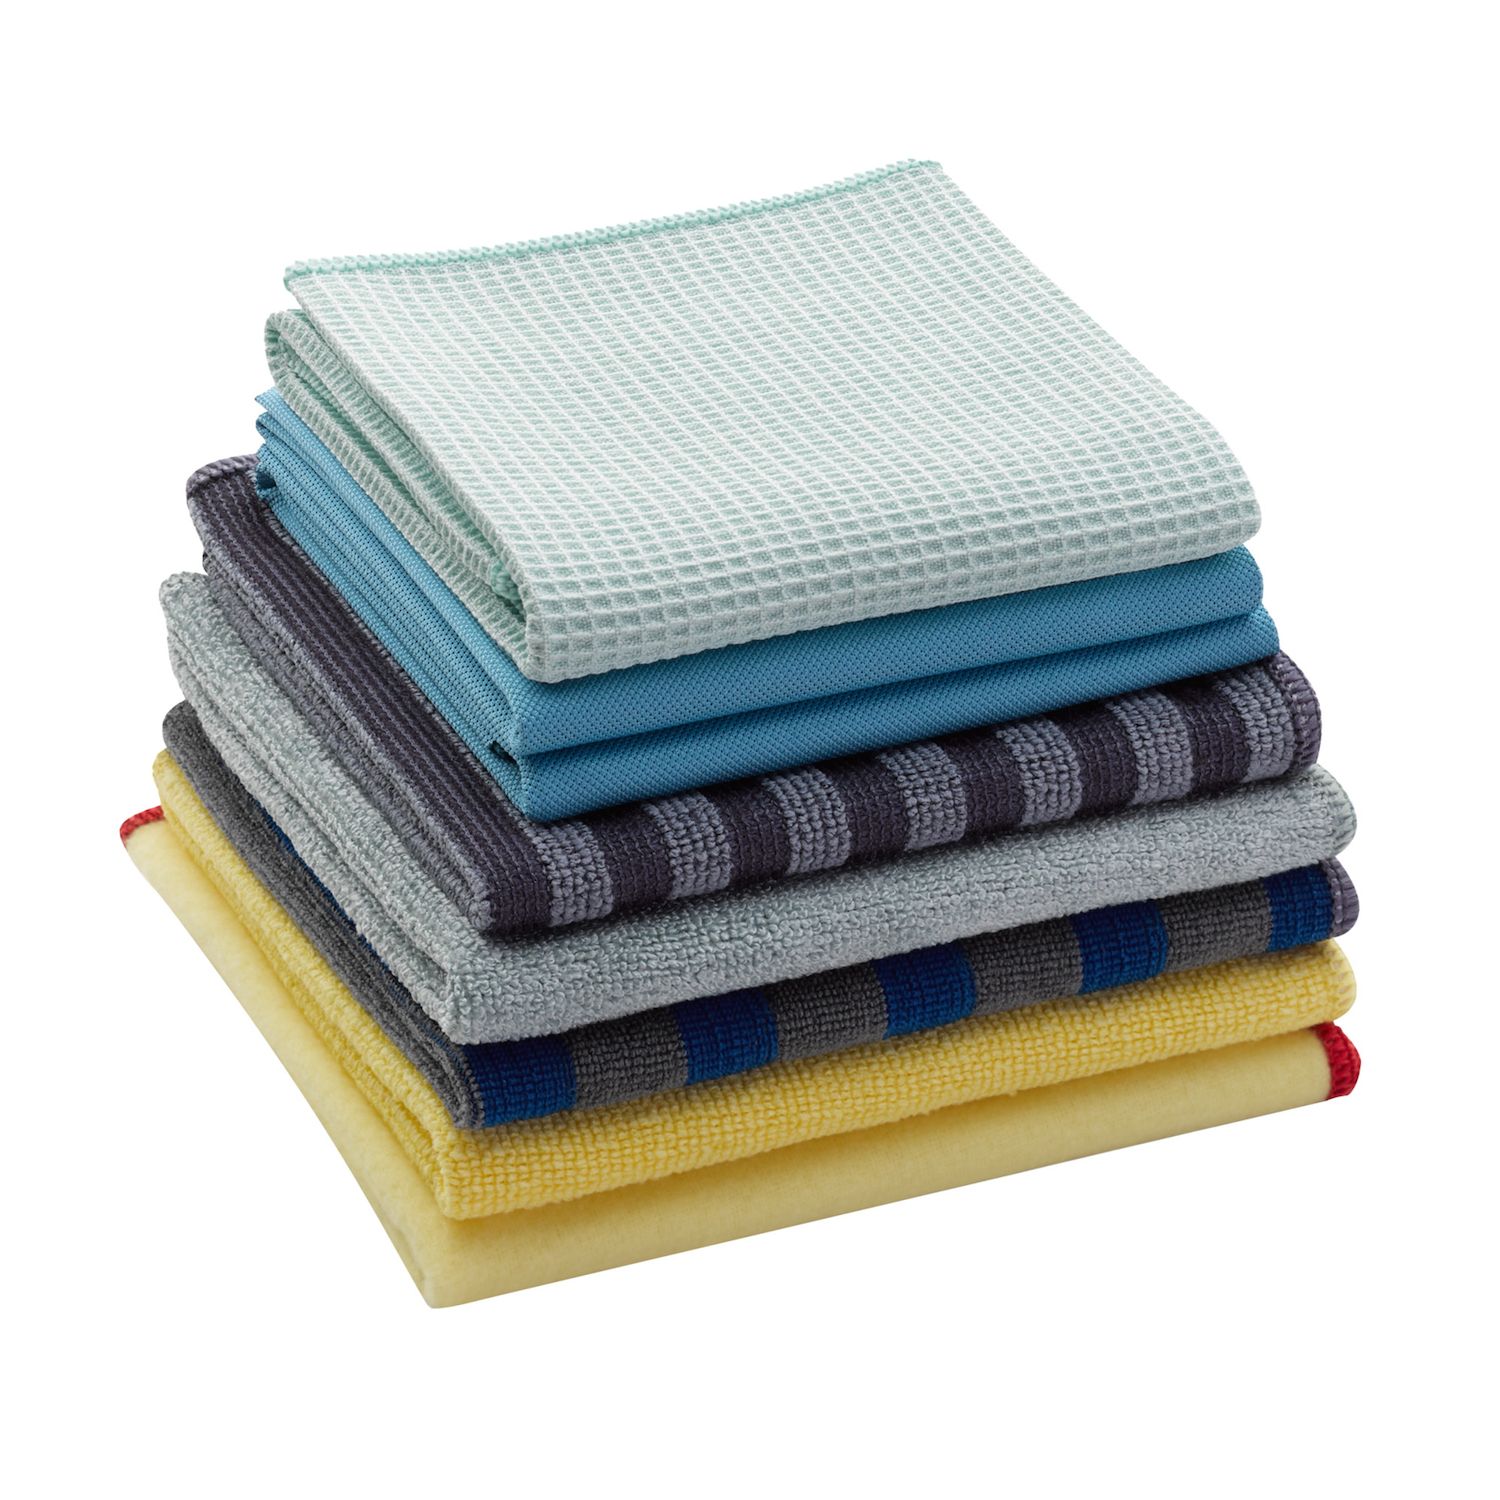 Image for E-Cloth Home Cleaning Set, Microfiber 8 Cloth Set at Kohl's.